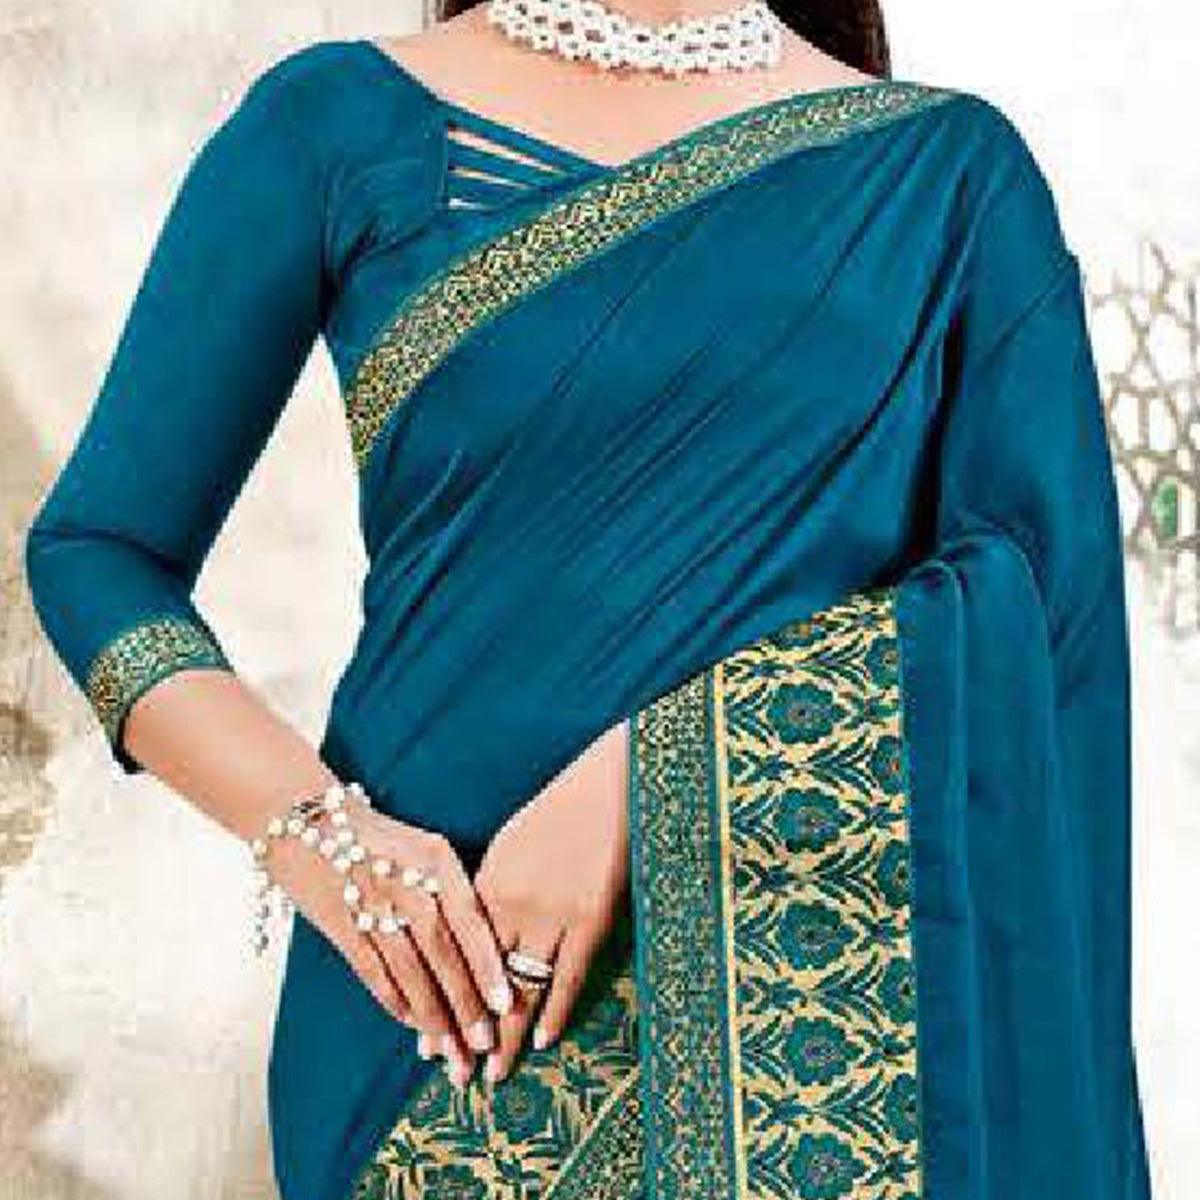 Teal Blue Casual Wear Solid Silk Saree With Fancy Border - Peachmode